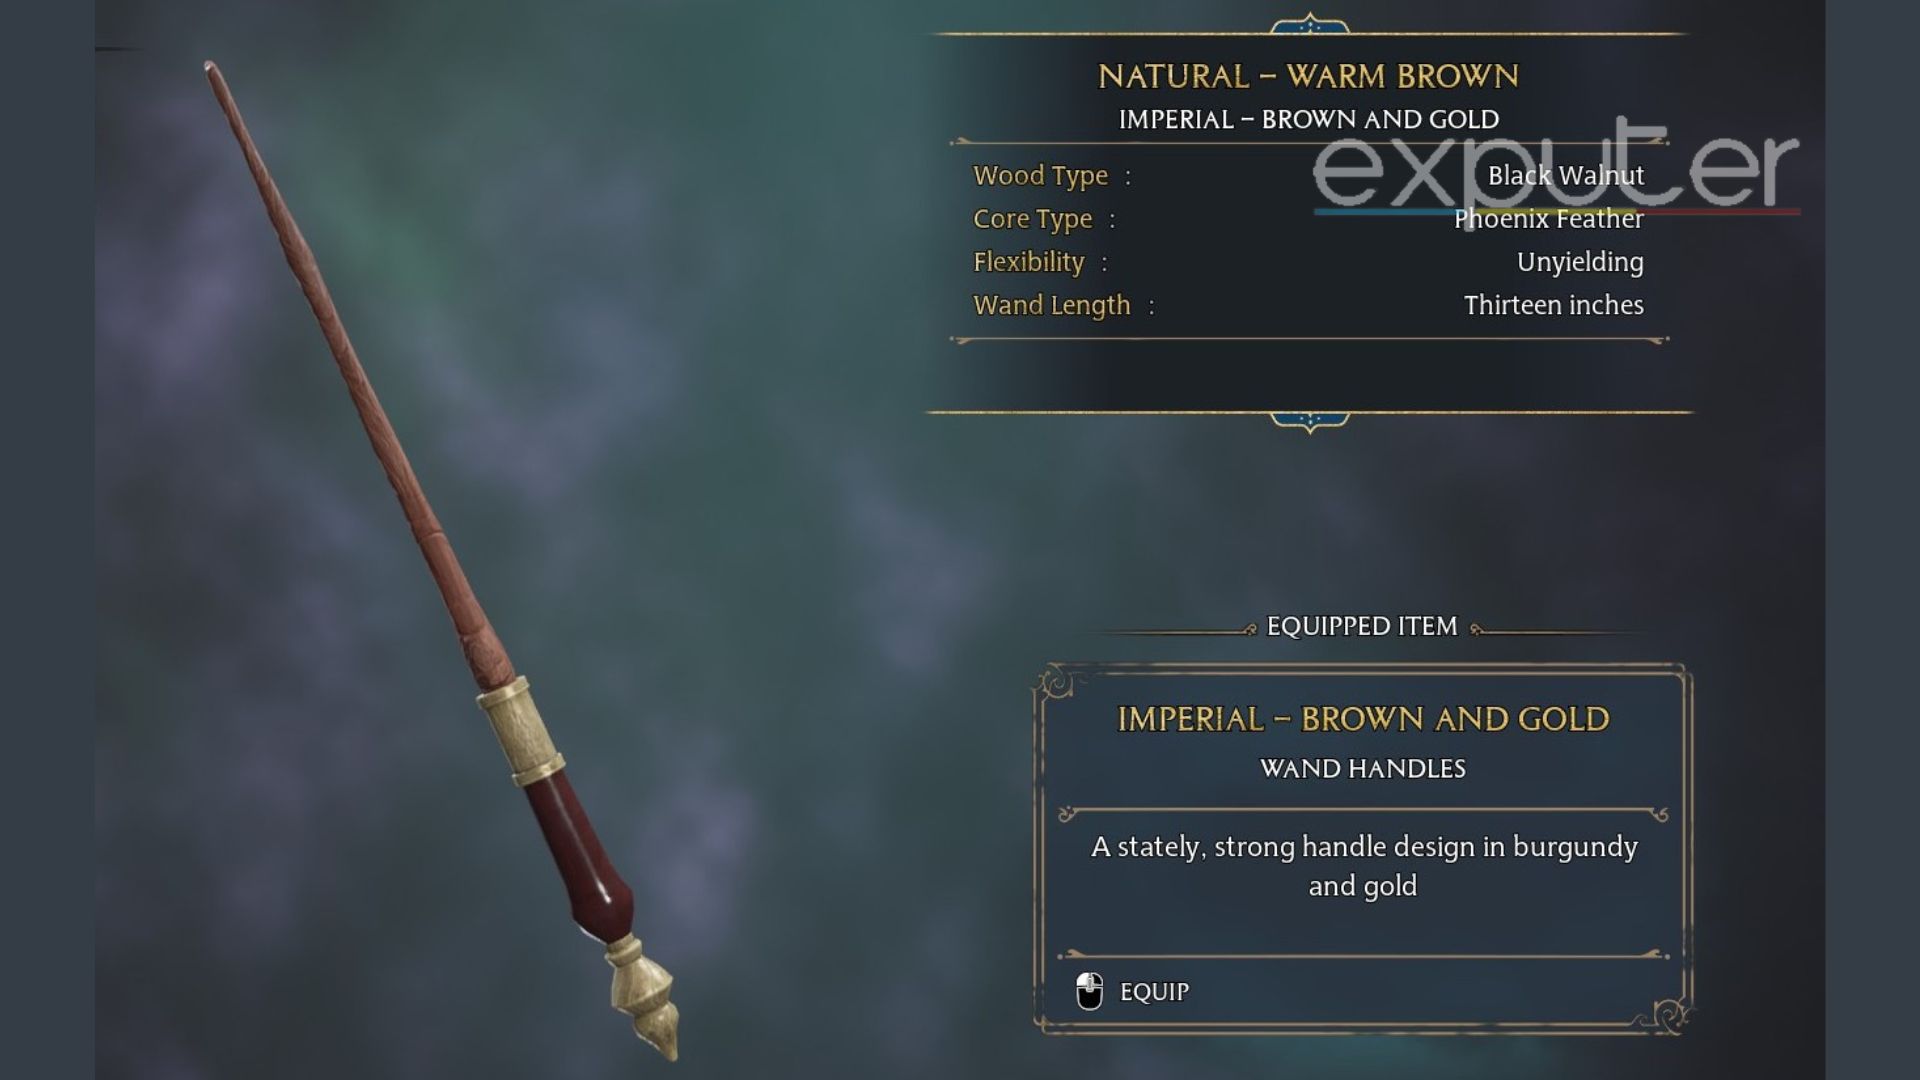 the imperial brown and gold wand handle.